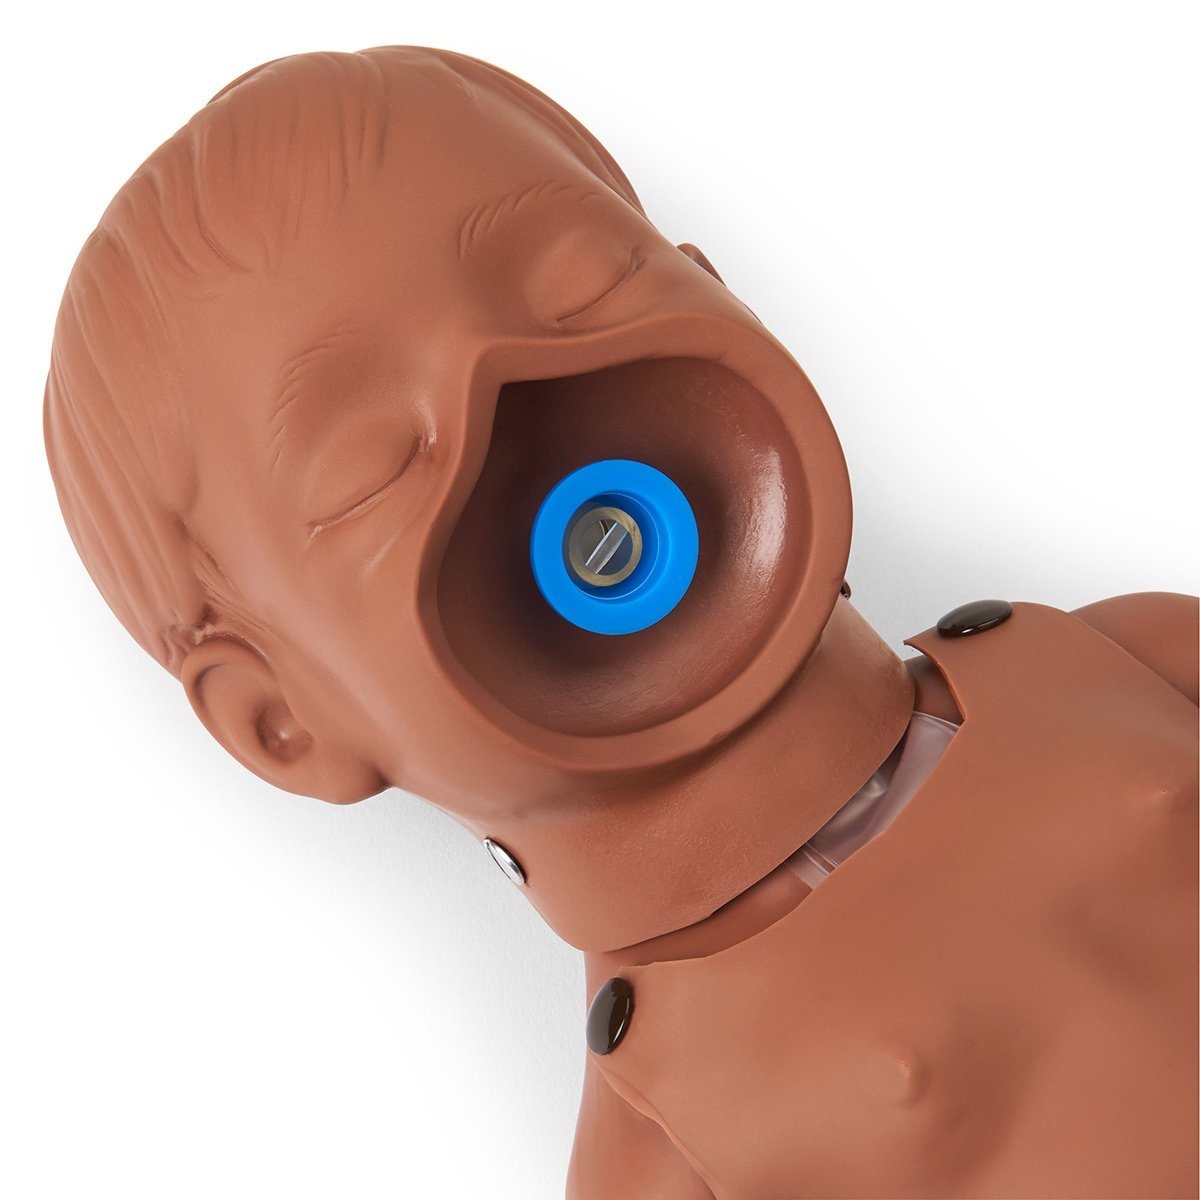 100-2976B Simulaids Kevin Infant CPR Manikin with Carry ...